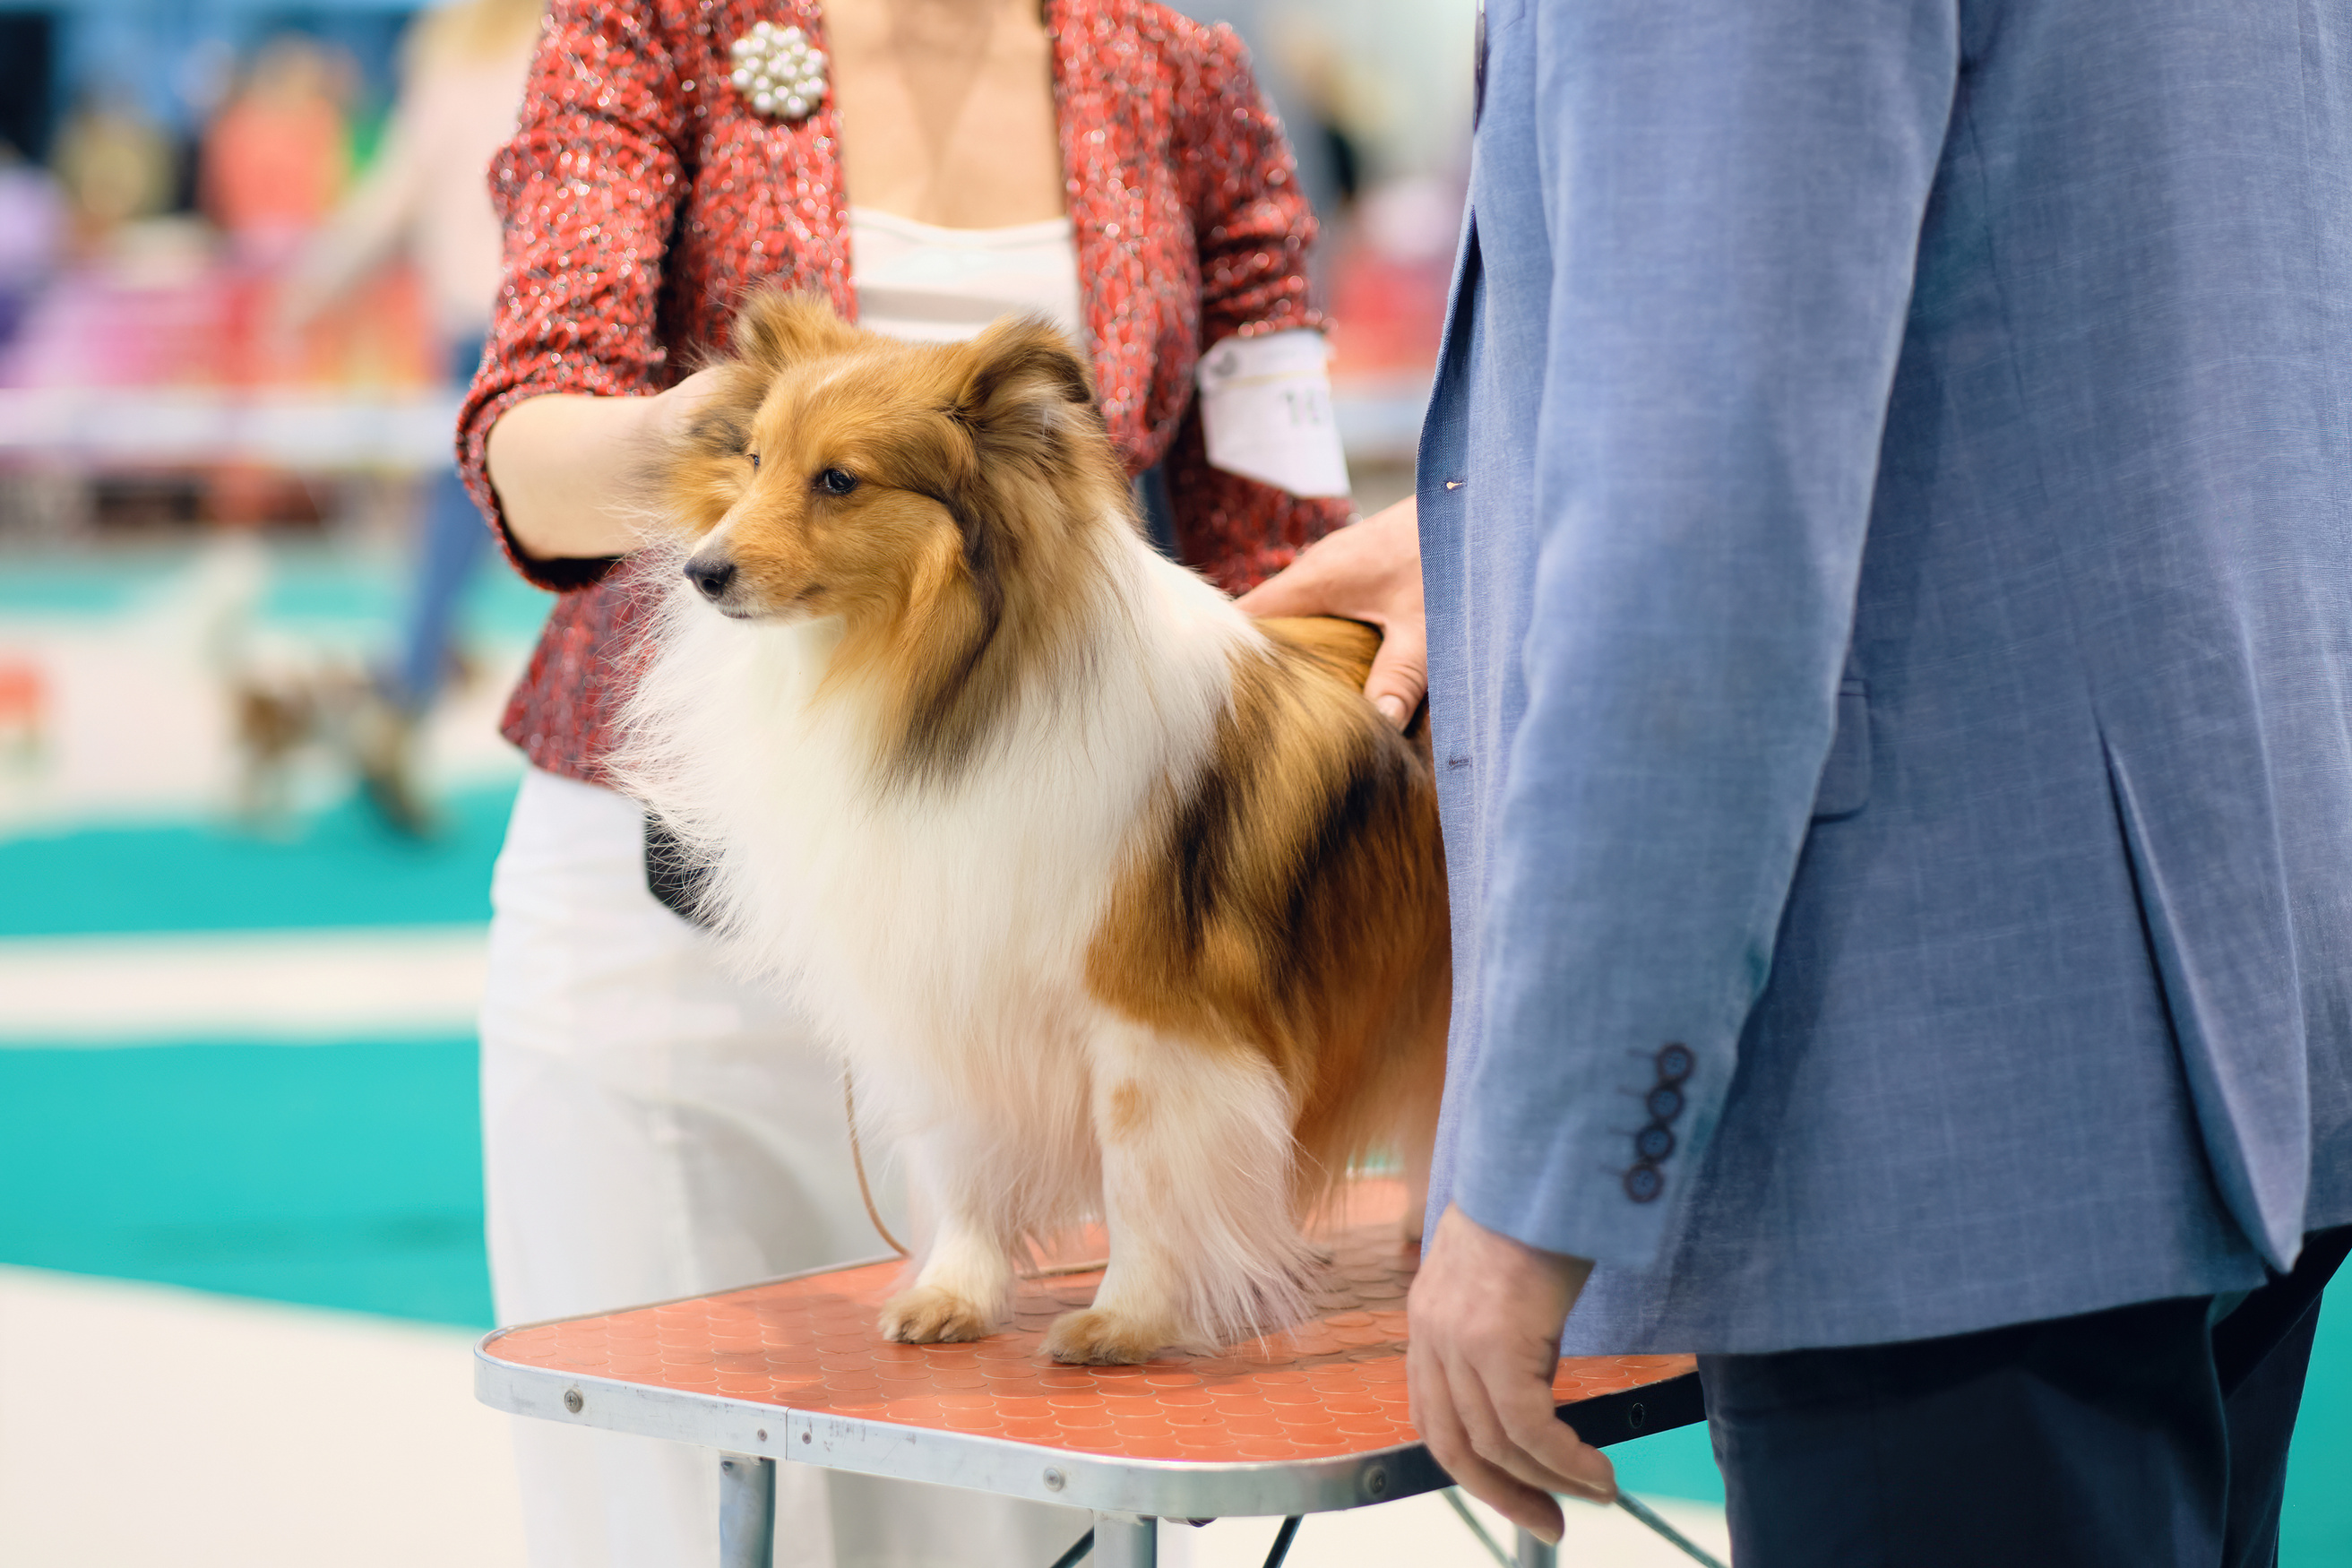 An expert examines Colin's grooming table at a dog show